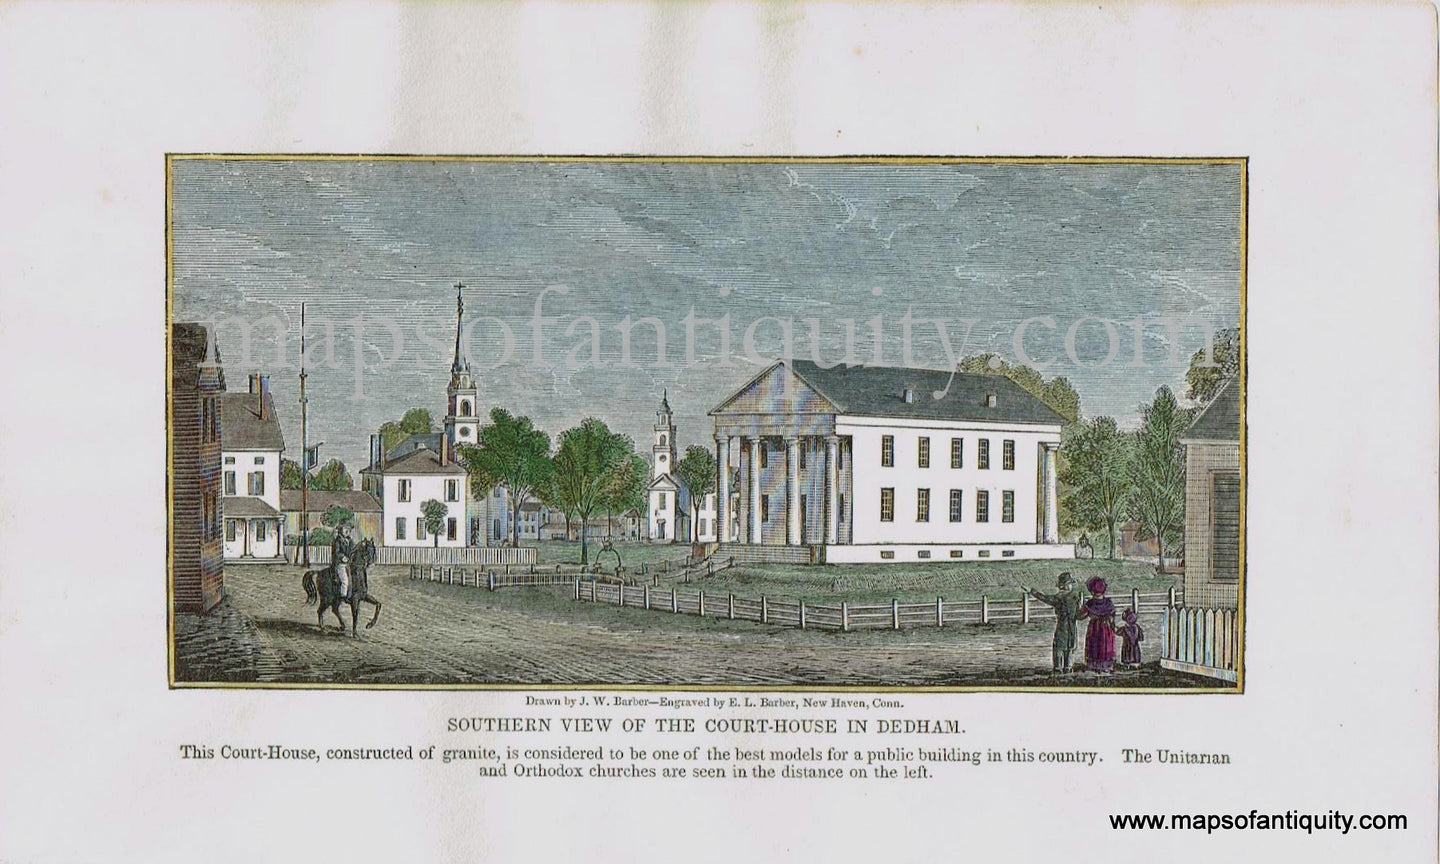 Hand-Colored-Antique-Illustration-Southern-View-of-the-Courth-House-in-Dedham-Courthouse-c.-1840-Barber-Dedham-1800s-19th-century-Maps-of-Antiquity